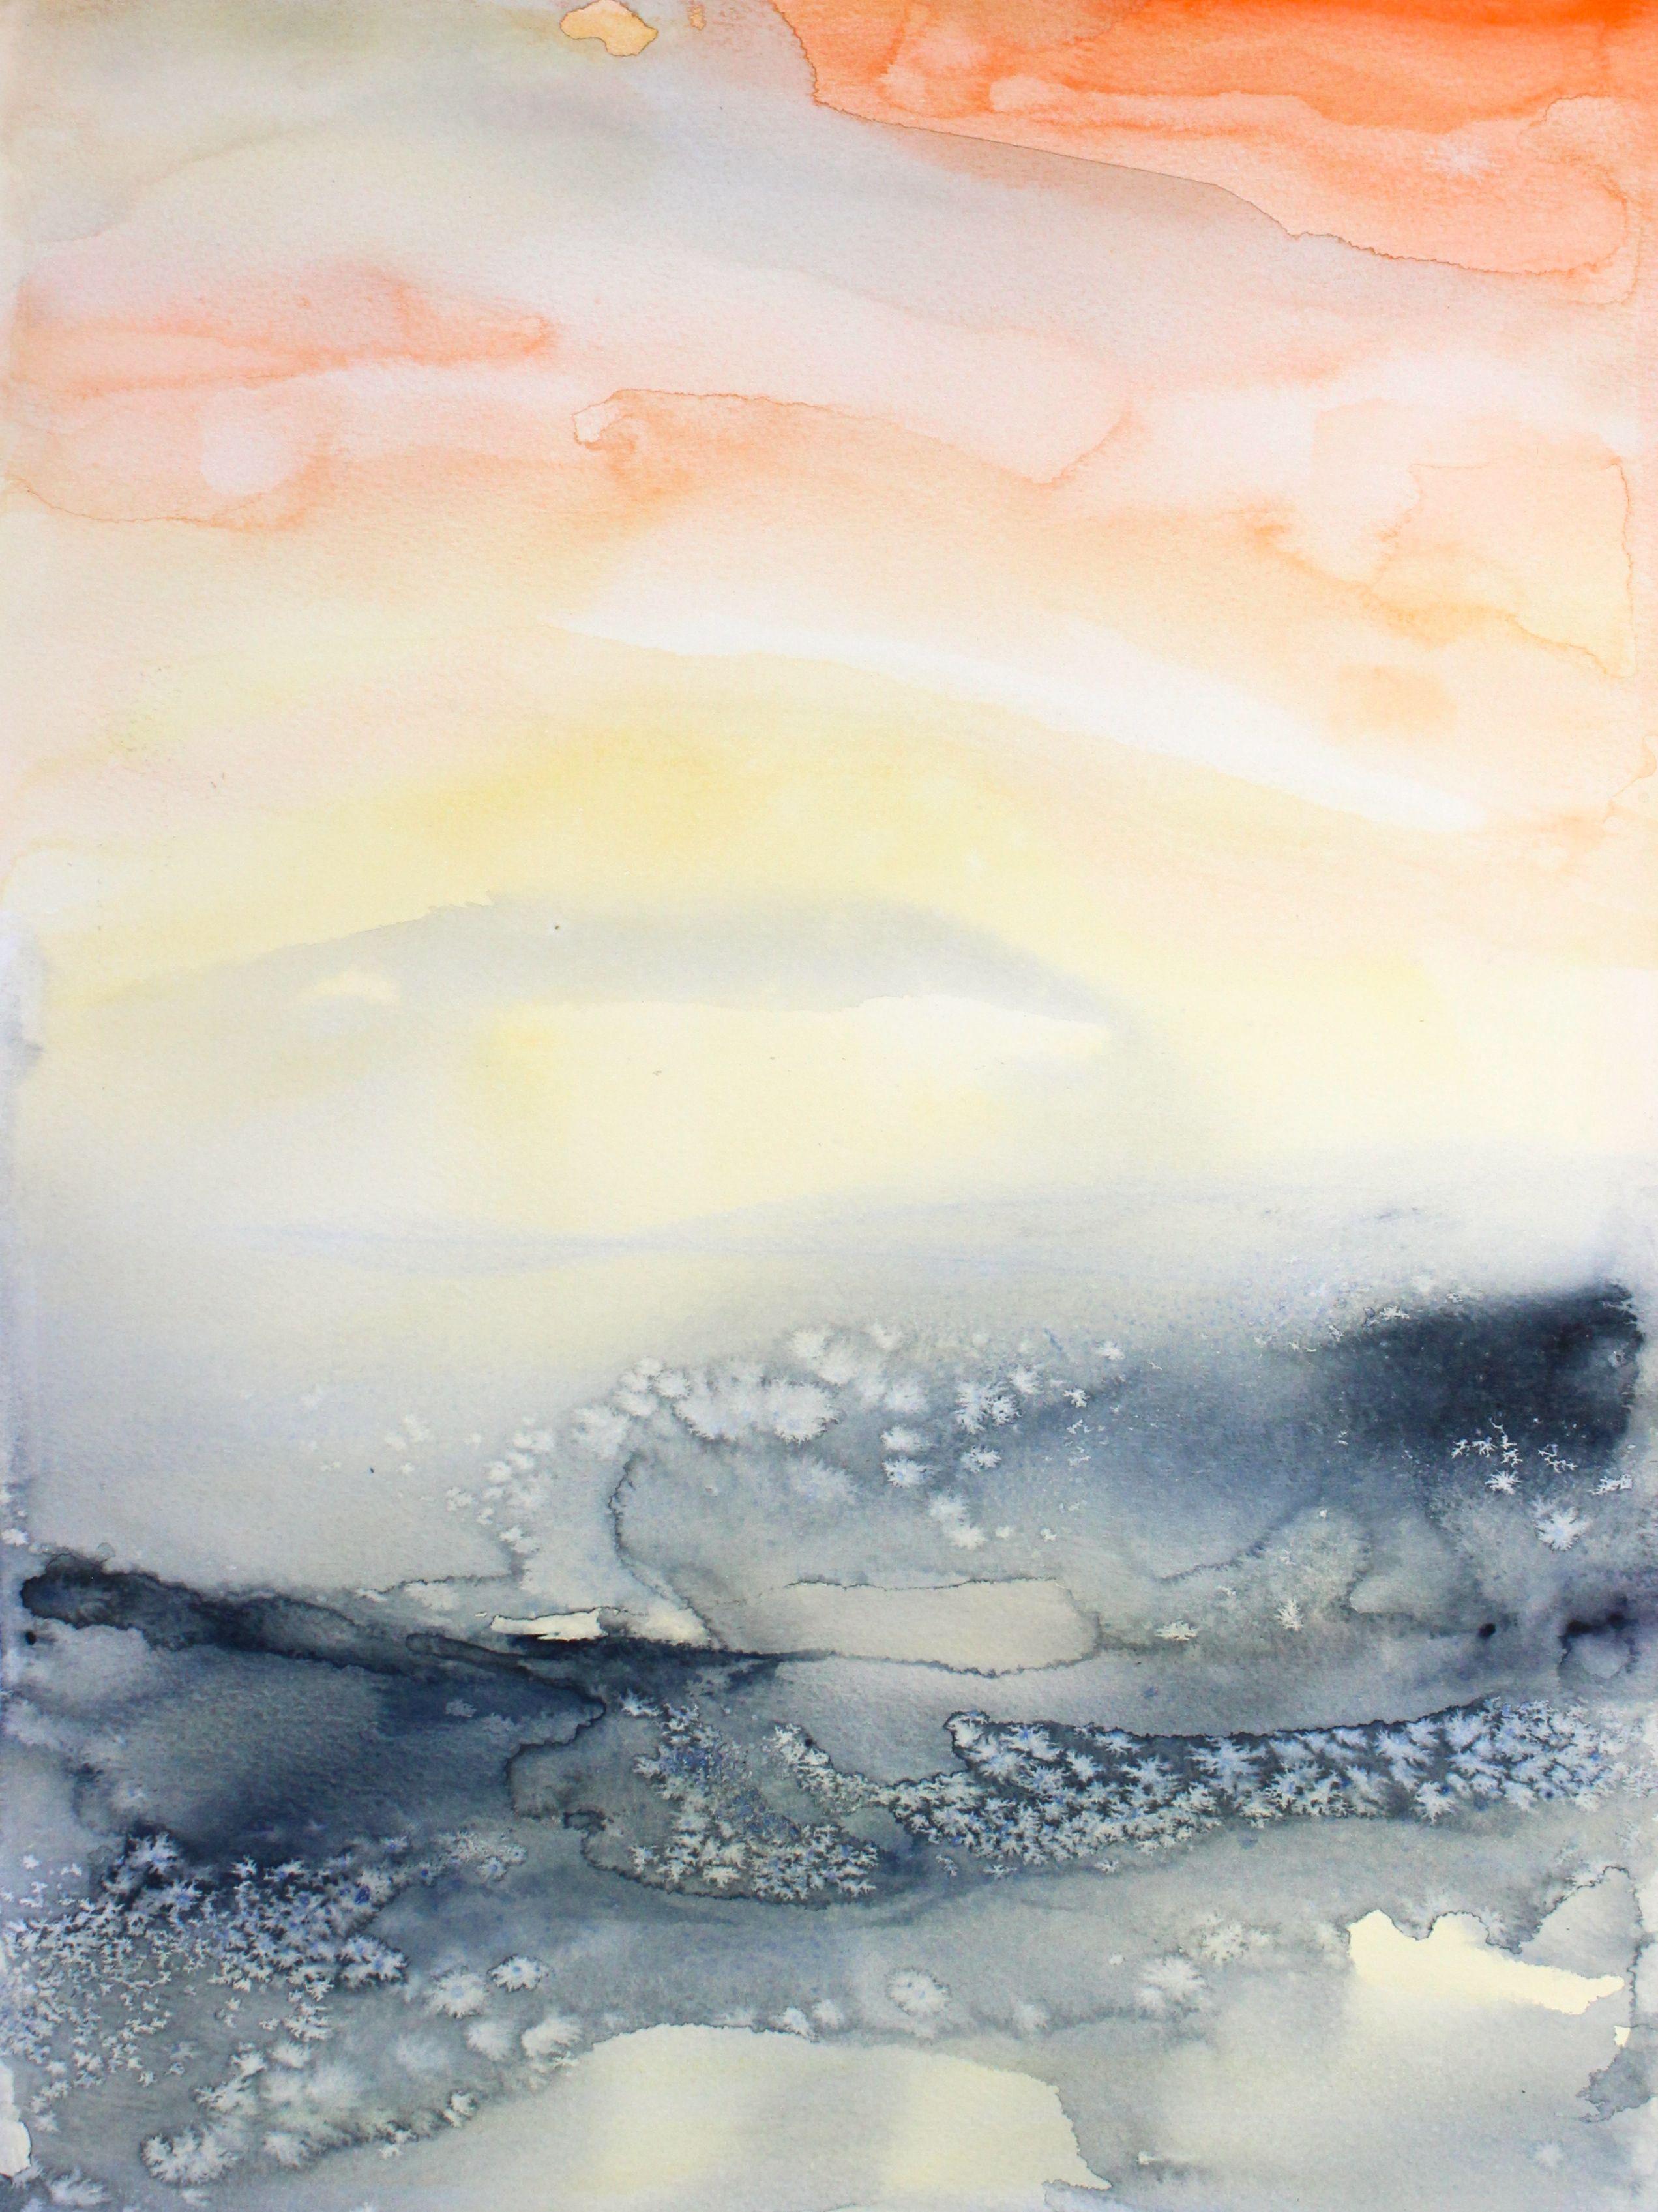 Abstract Drawing Laura Spring - Timeless 2, peinture, aquarelle sur papier